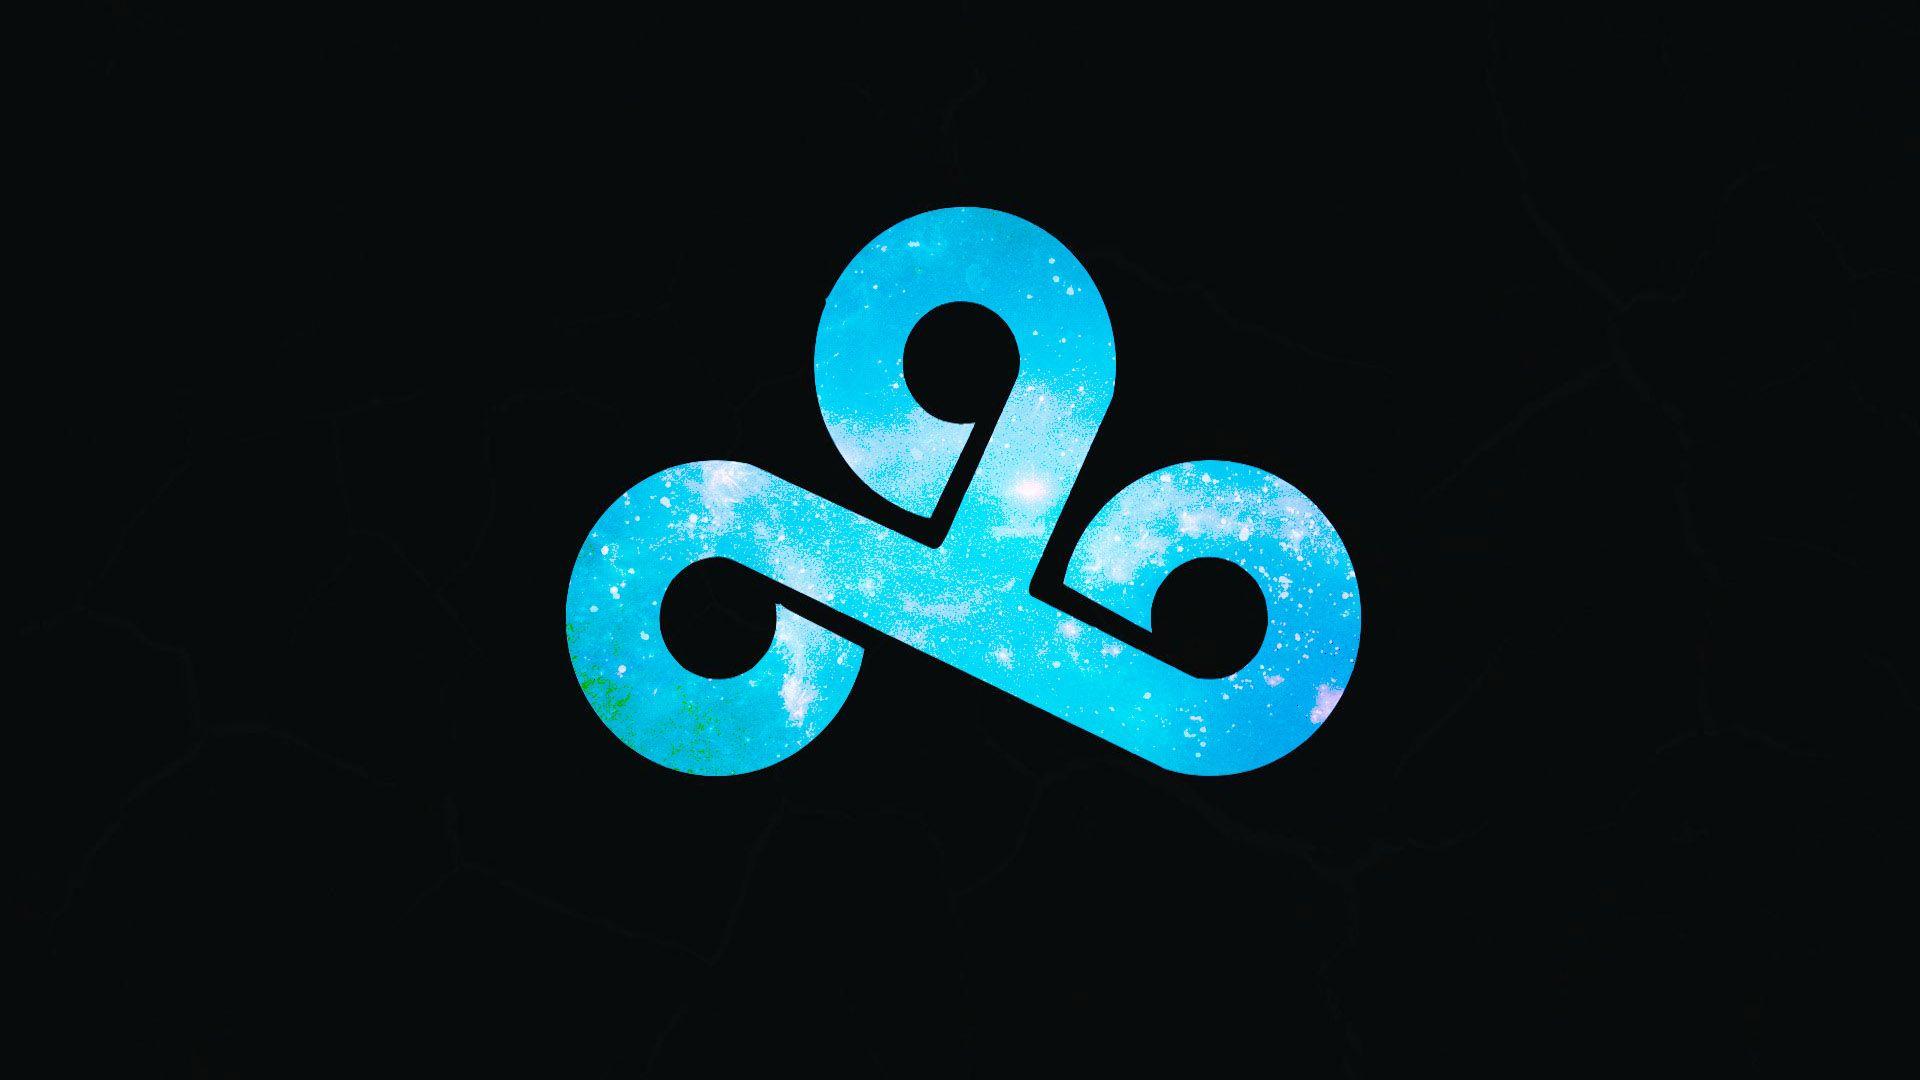 C9 Logo - Made this C9 Wallpaper earlier. First time photohop user, so feel